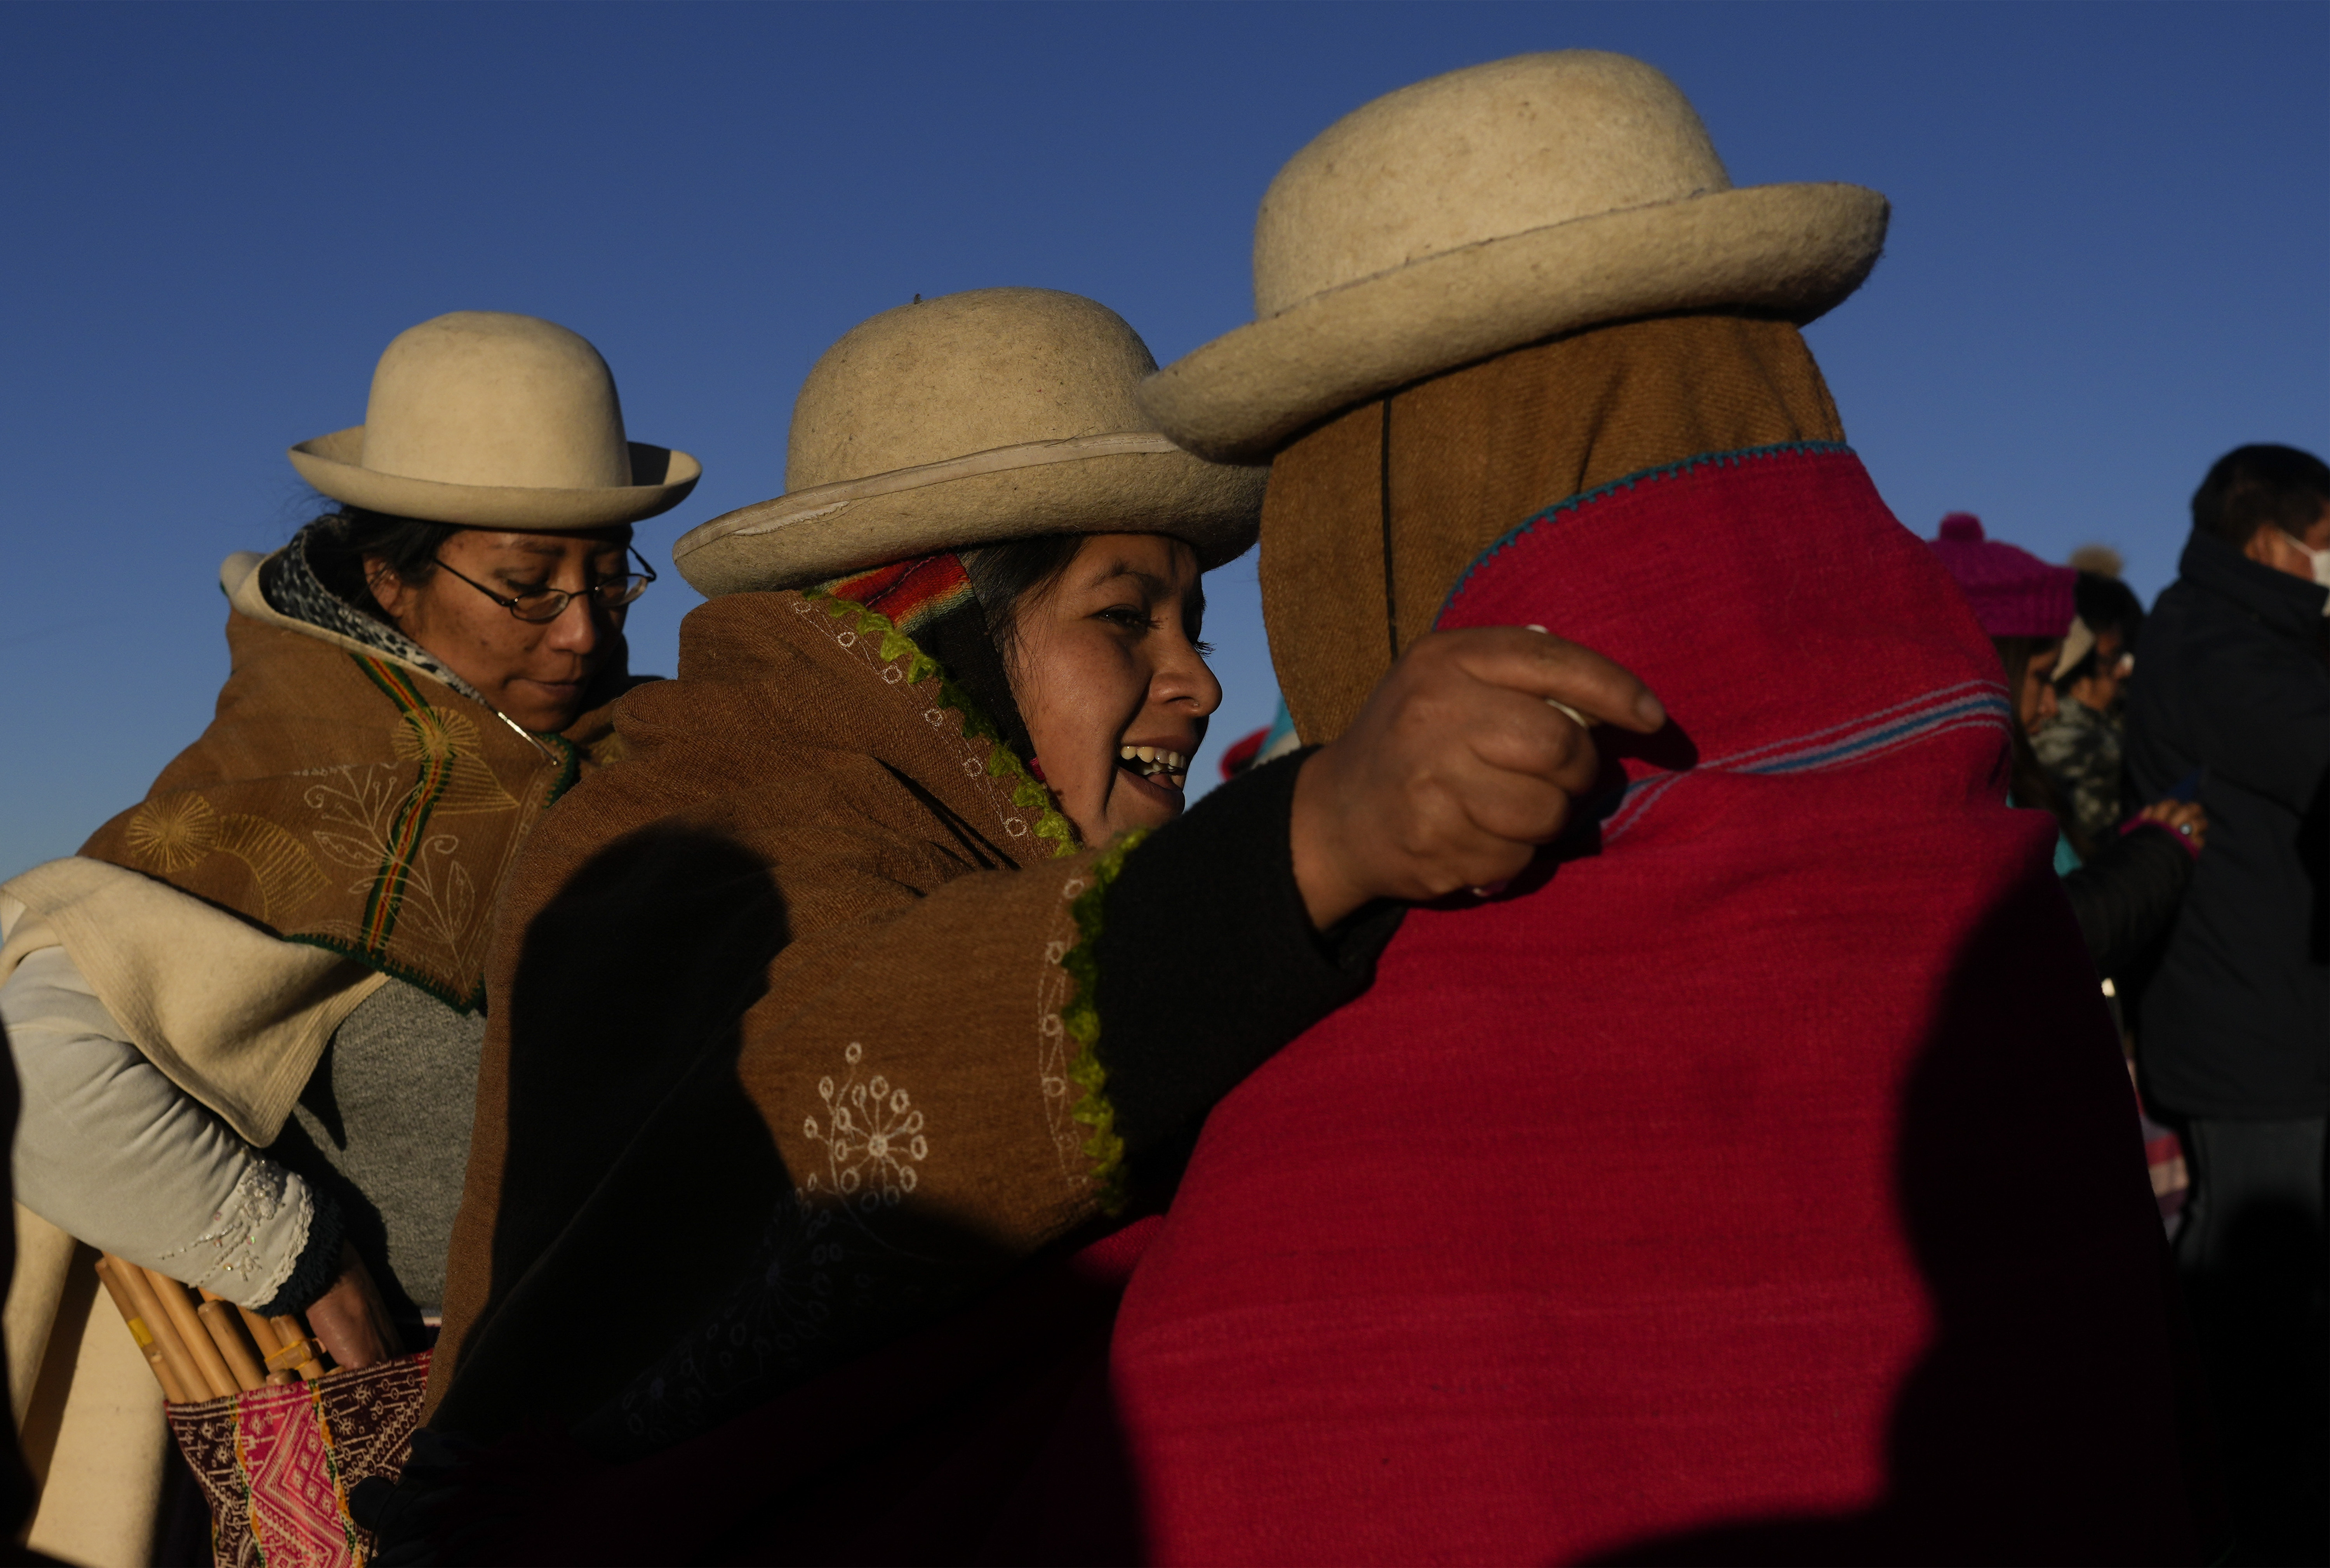 Aymara women embrace after receiving the first rays of sunlight in a New Year's ritual on the sacred mountain Apacheta Murmutani on the outskirts of Hampaturi, Bolivia, early Wednesday, June 21, 2023. Aymara Indigenous communities are celebrating the Andean new year 5,531 or 